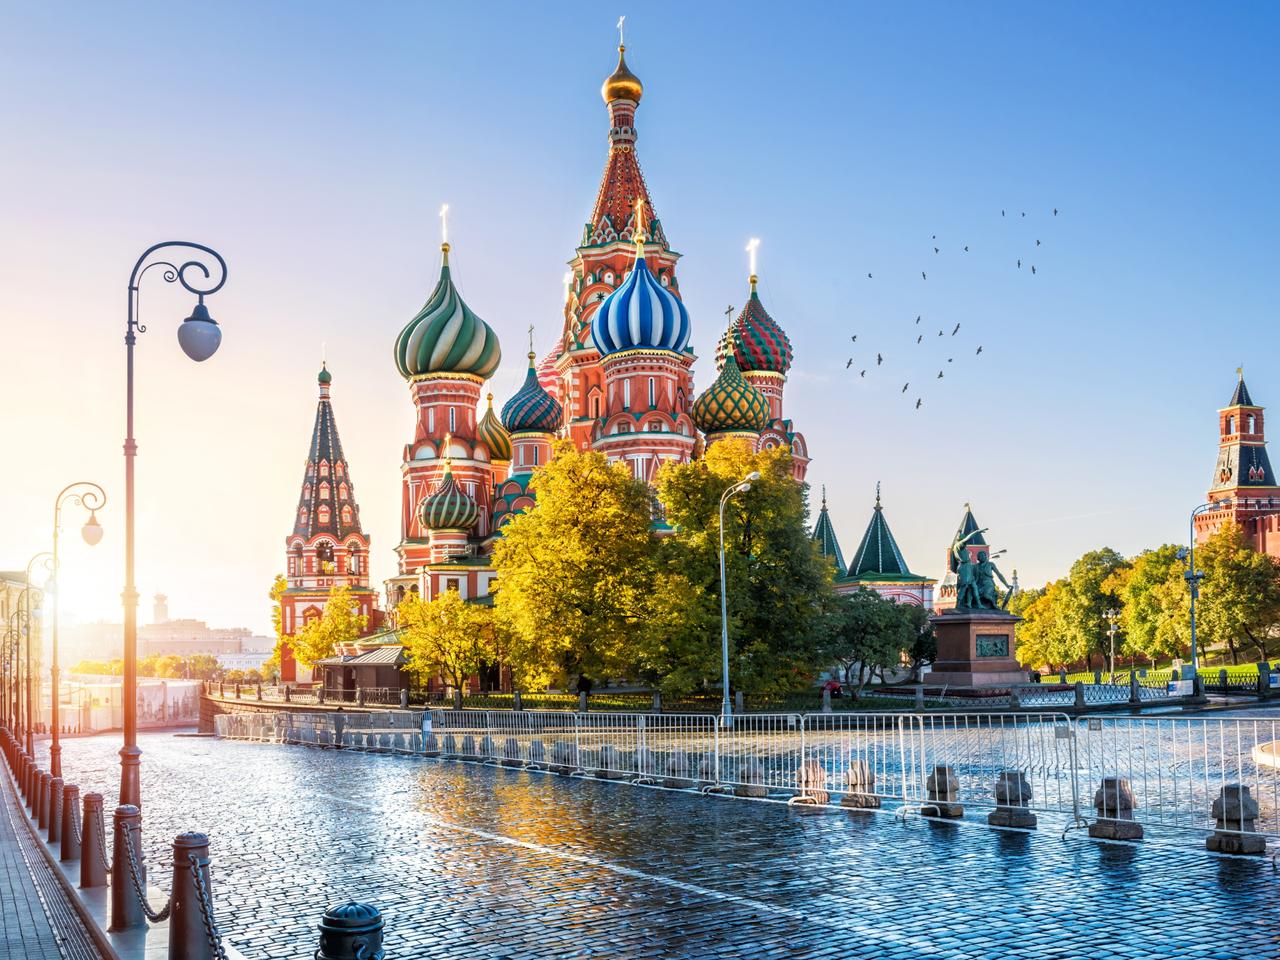 Getting 8 Right on This General Knowledge Quiz Is Average, But 12 Right Means You’re a Genius St. Basil's Cathedral, Moscow, Russia